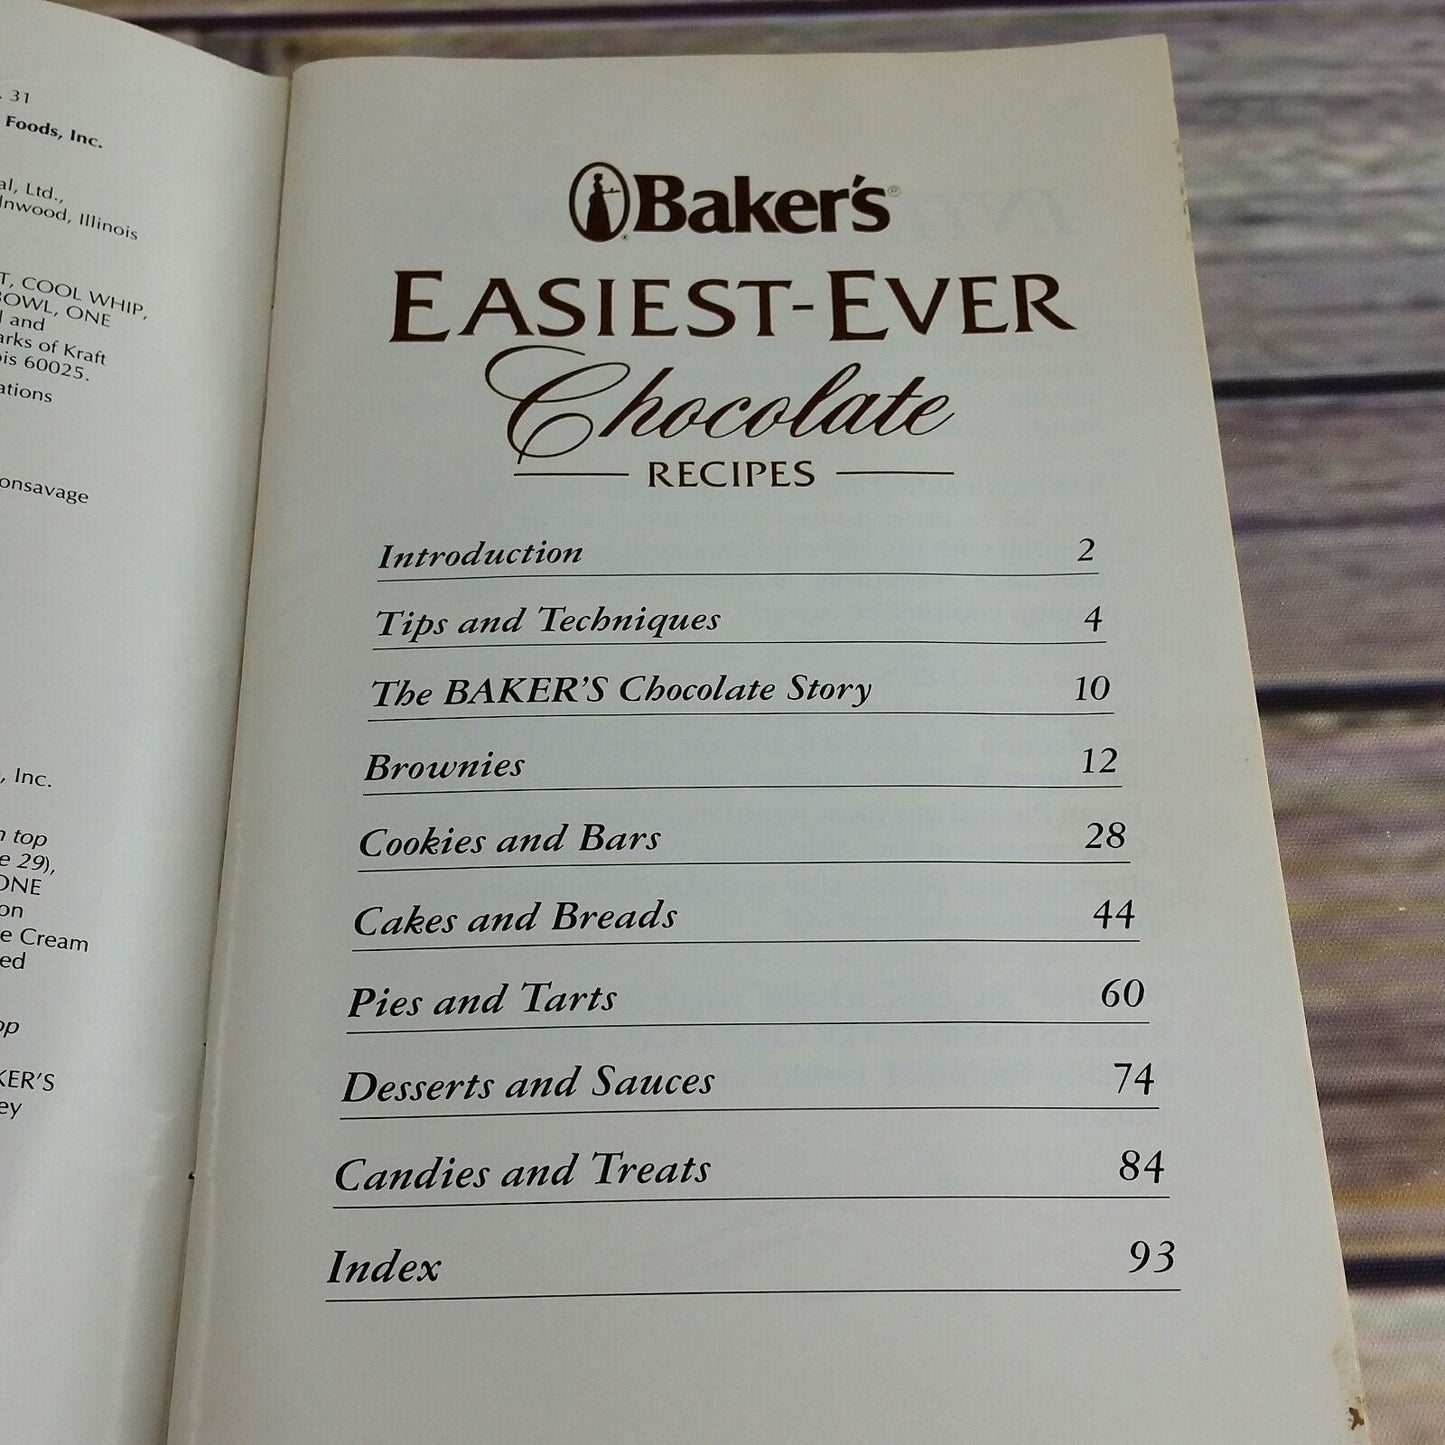 Bakers Chocolate Easiest Ever Chocolate Recipes Cookbook Best Recipes 1993 Paperback Promo Booklet